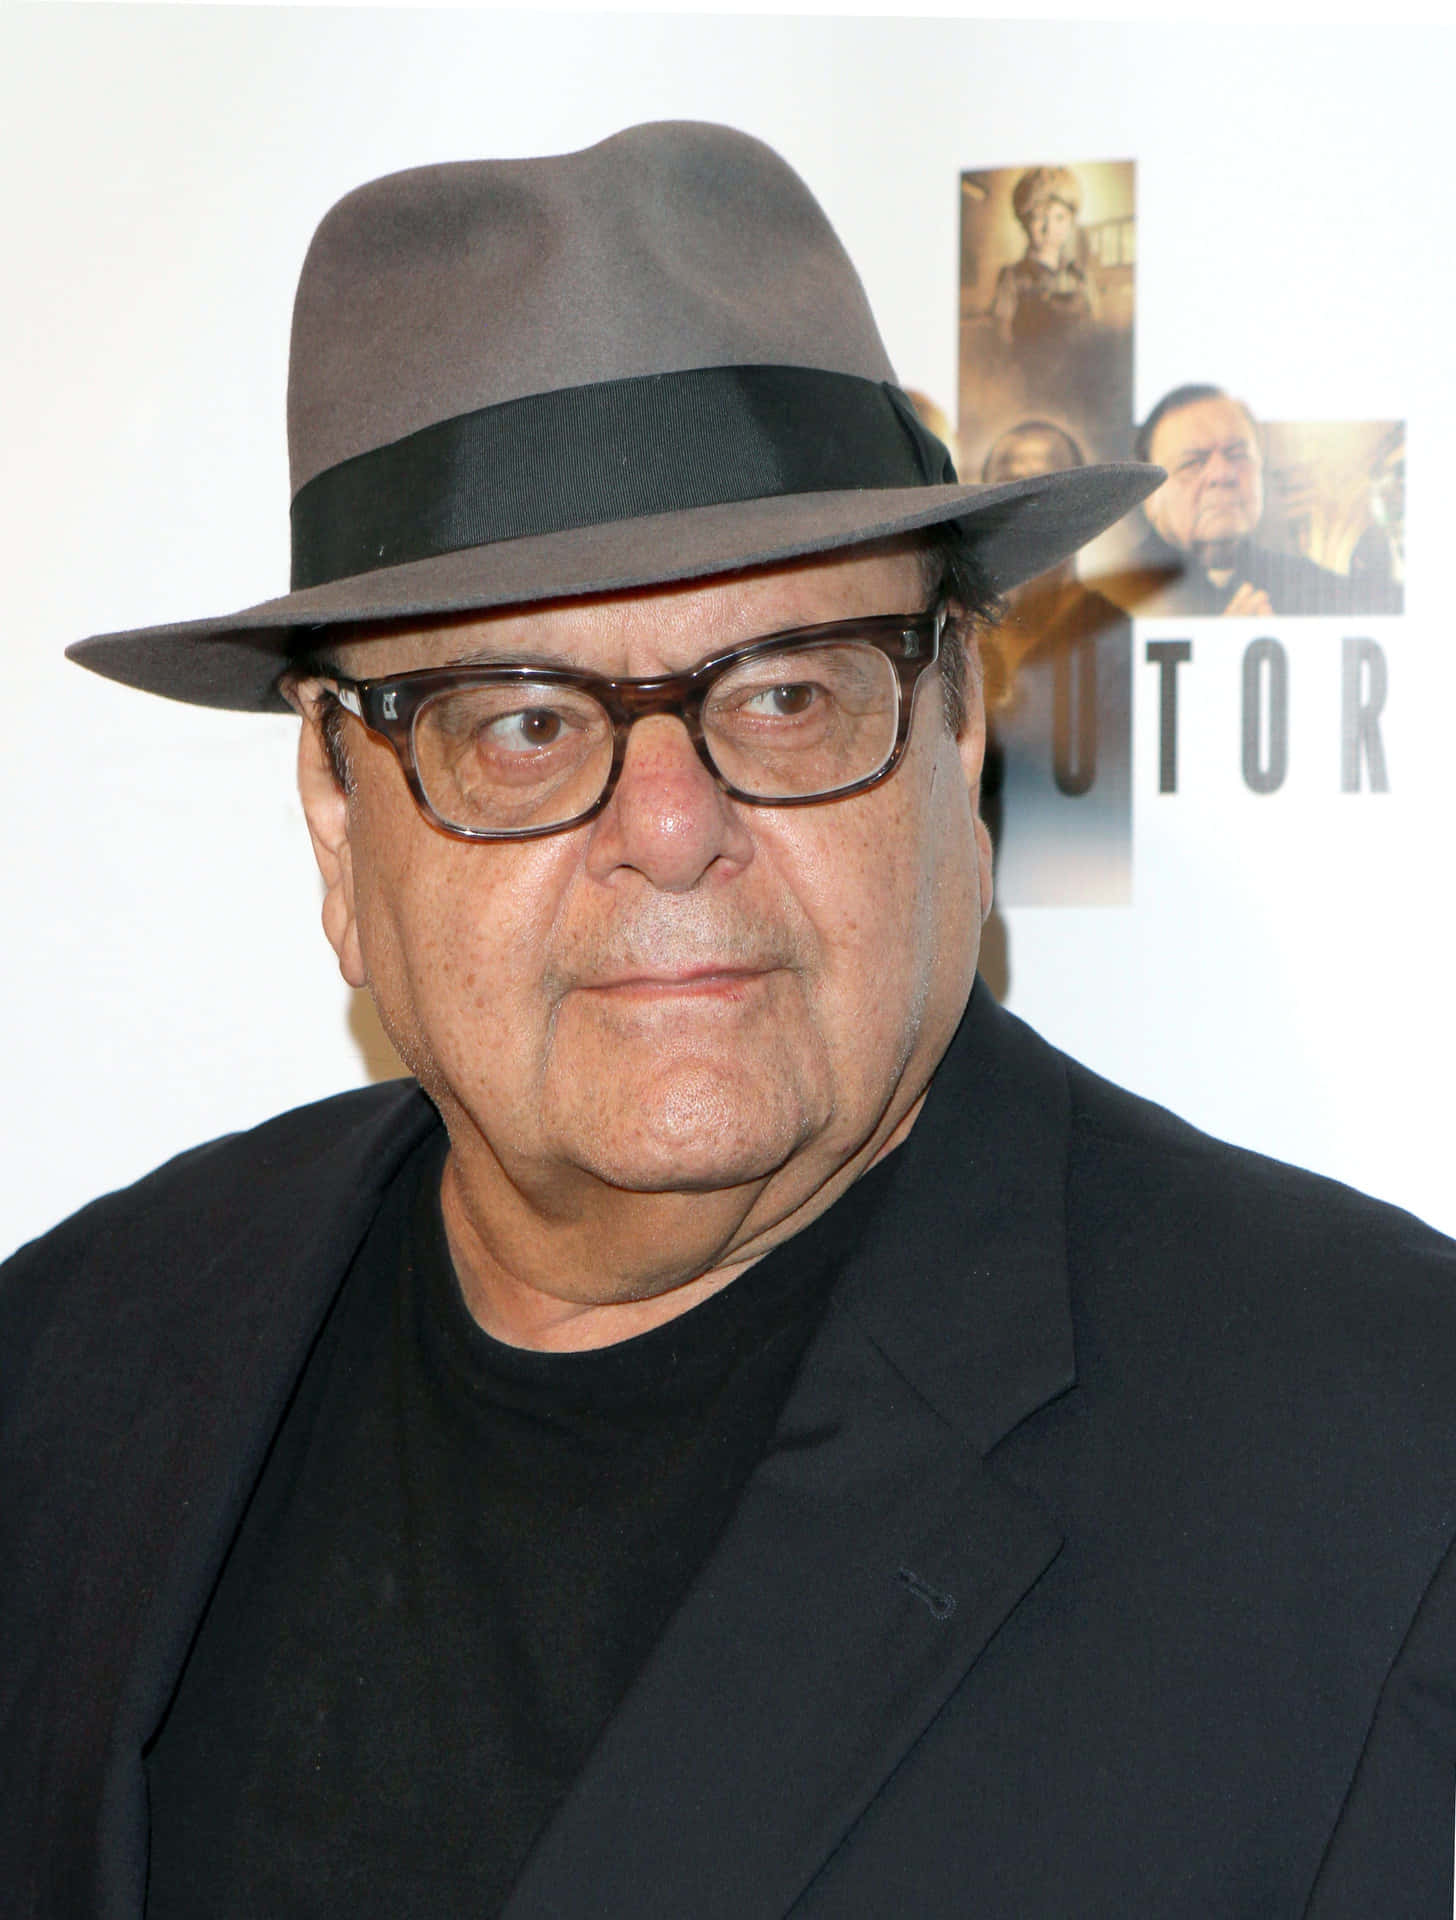 Actorpaul Sorvino Would Be Translated In Spanish As 